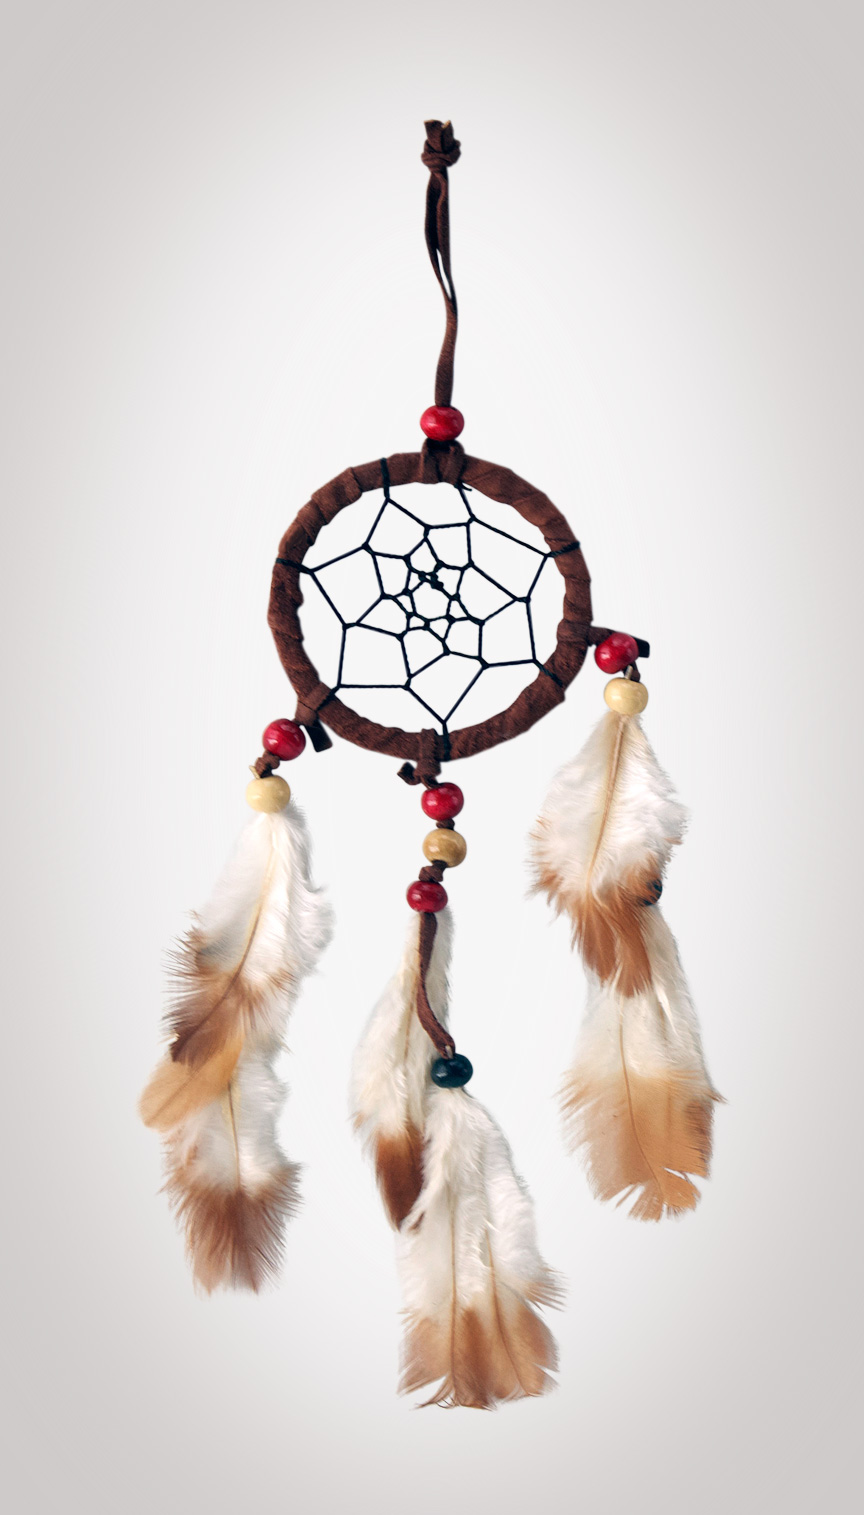 Shows an image of our dreamcatcher owg007